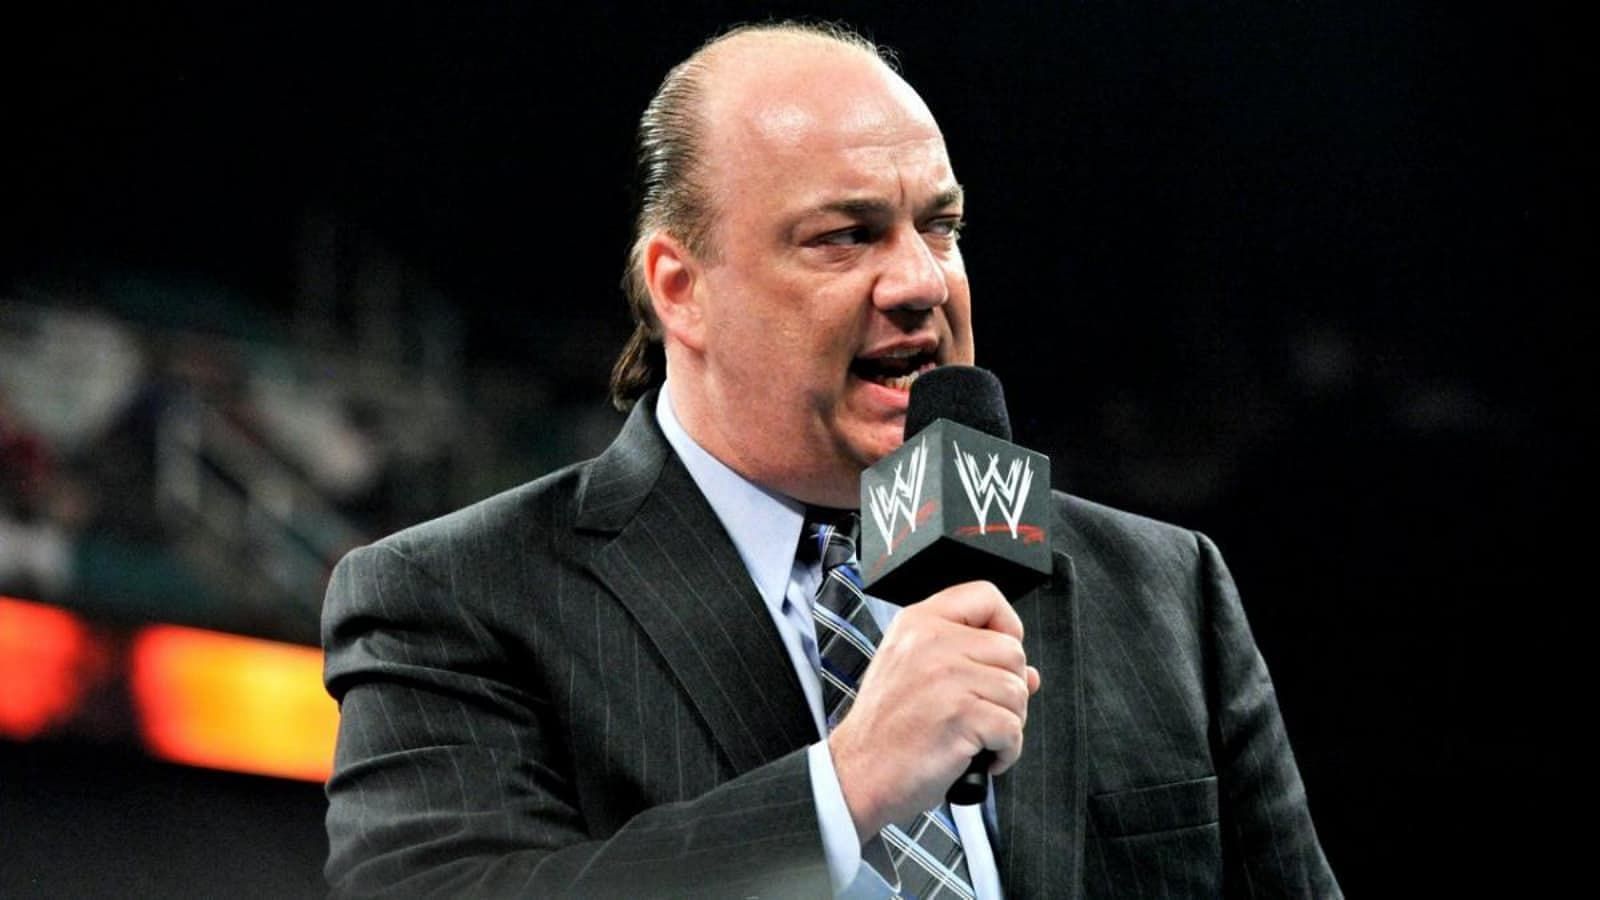 Paul Heyman is a special counsel to Roman Reigns